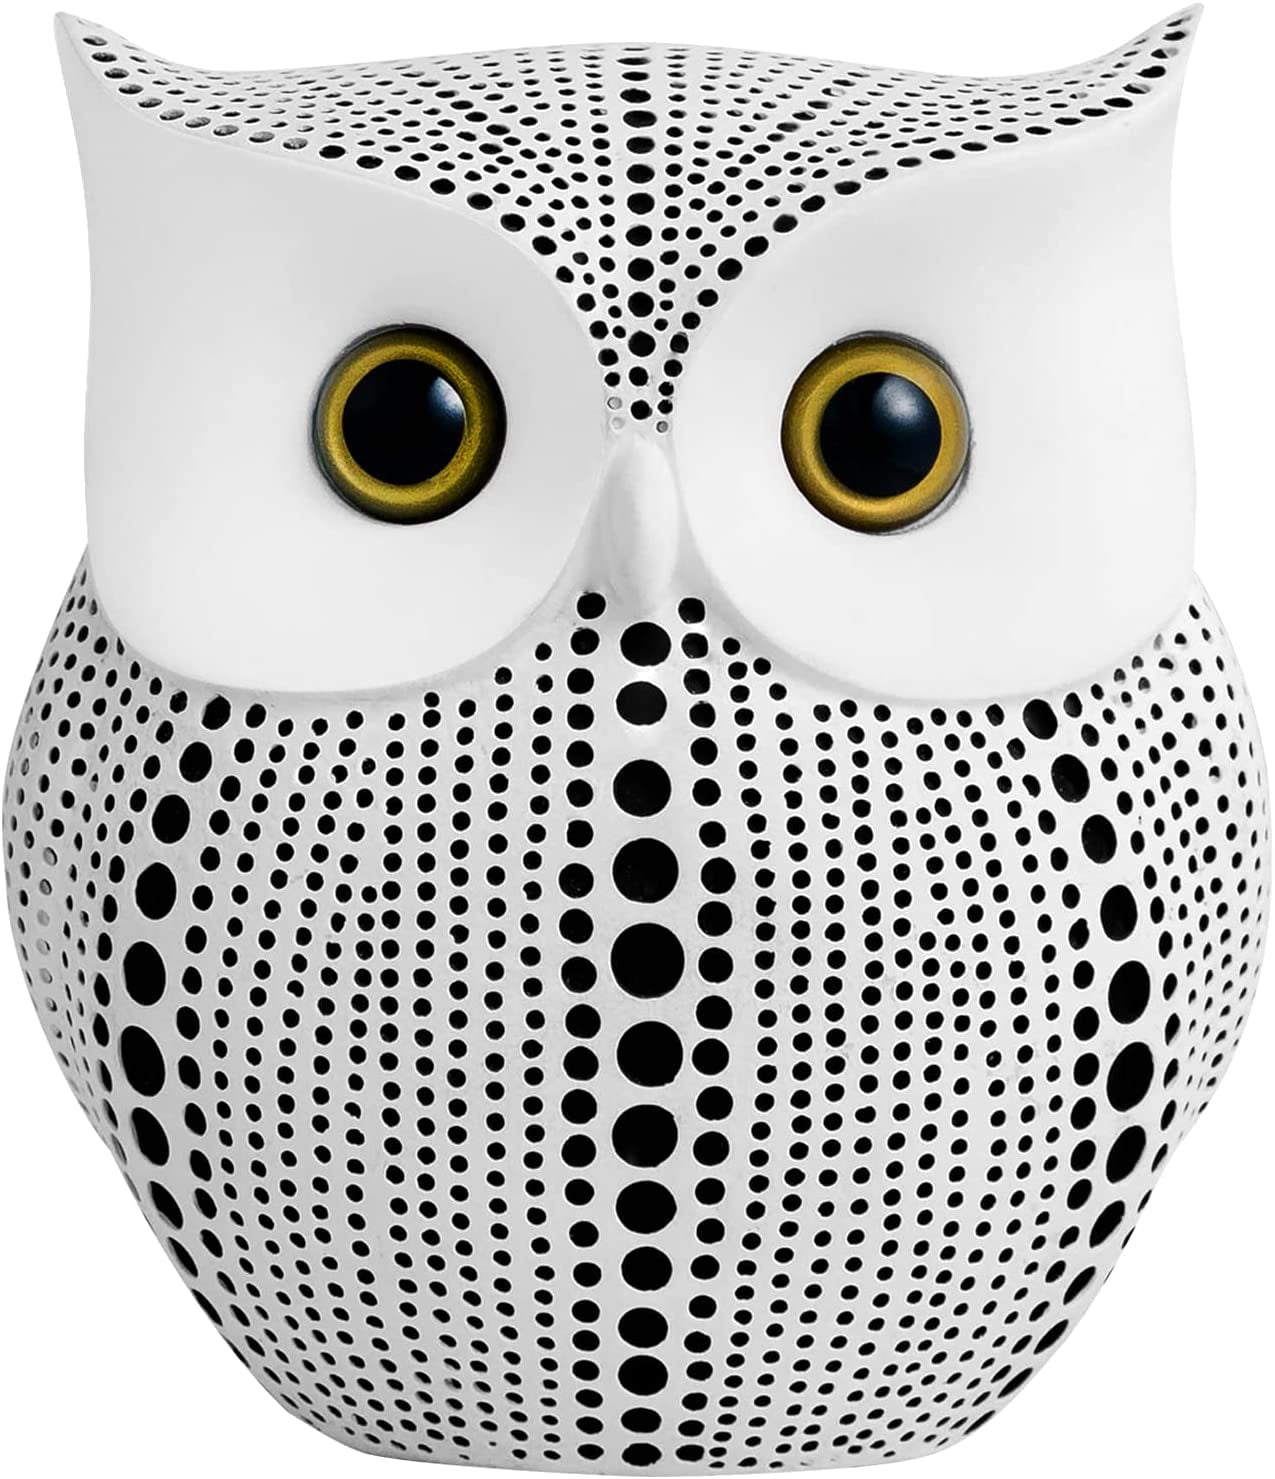 2 Pack Owl Statue for Home Decor Accents Living Room Office Bedroom Kitchen Laundry House Apartment Dorm Bar, Decoration for Shelf Table Decor, Gifts for Owls Lovers (White)